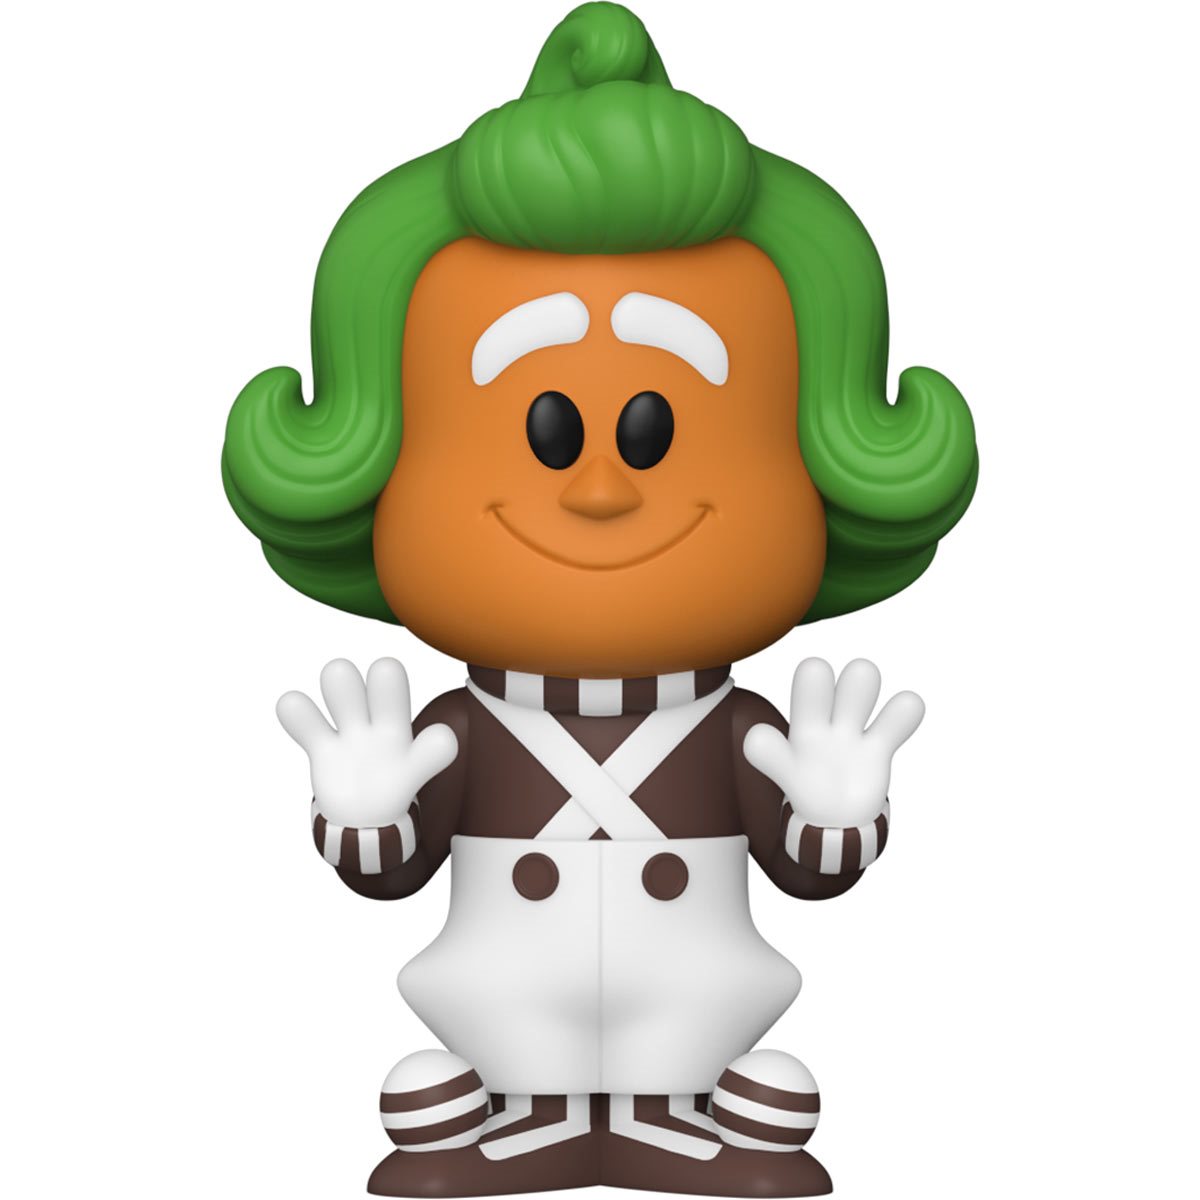 Oompa Loompa Doopity-Do, Pop! Has Some Willy Wonka Figures For You!